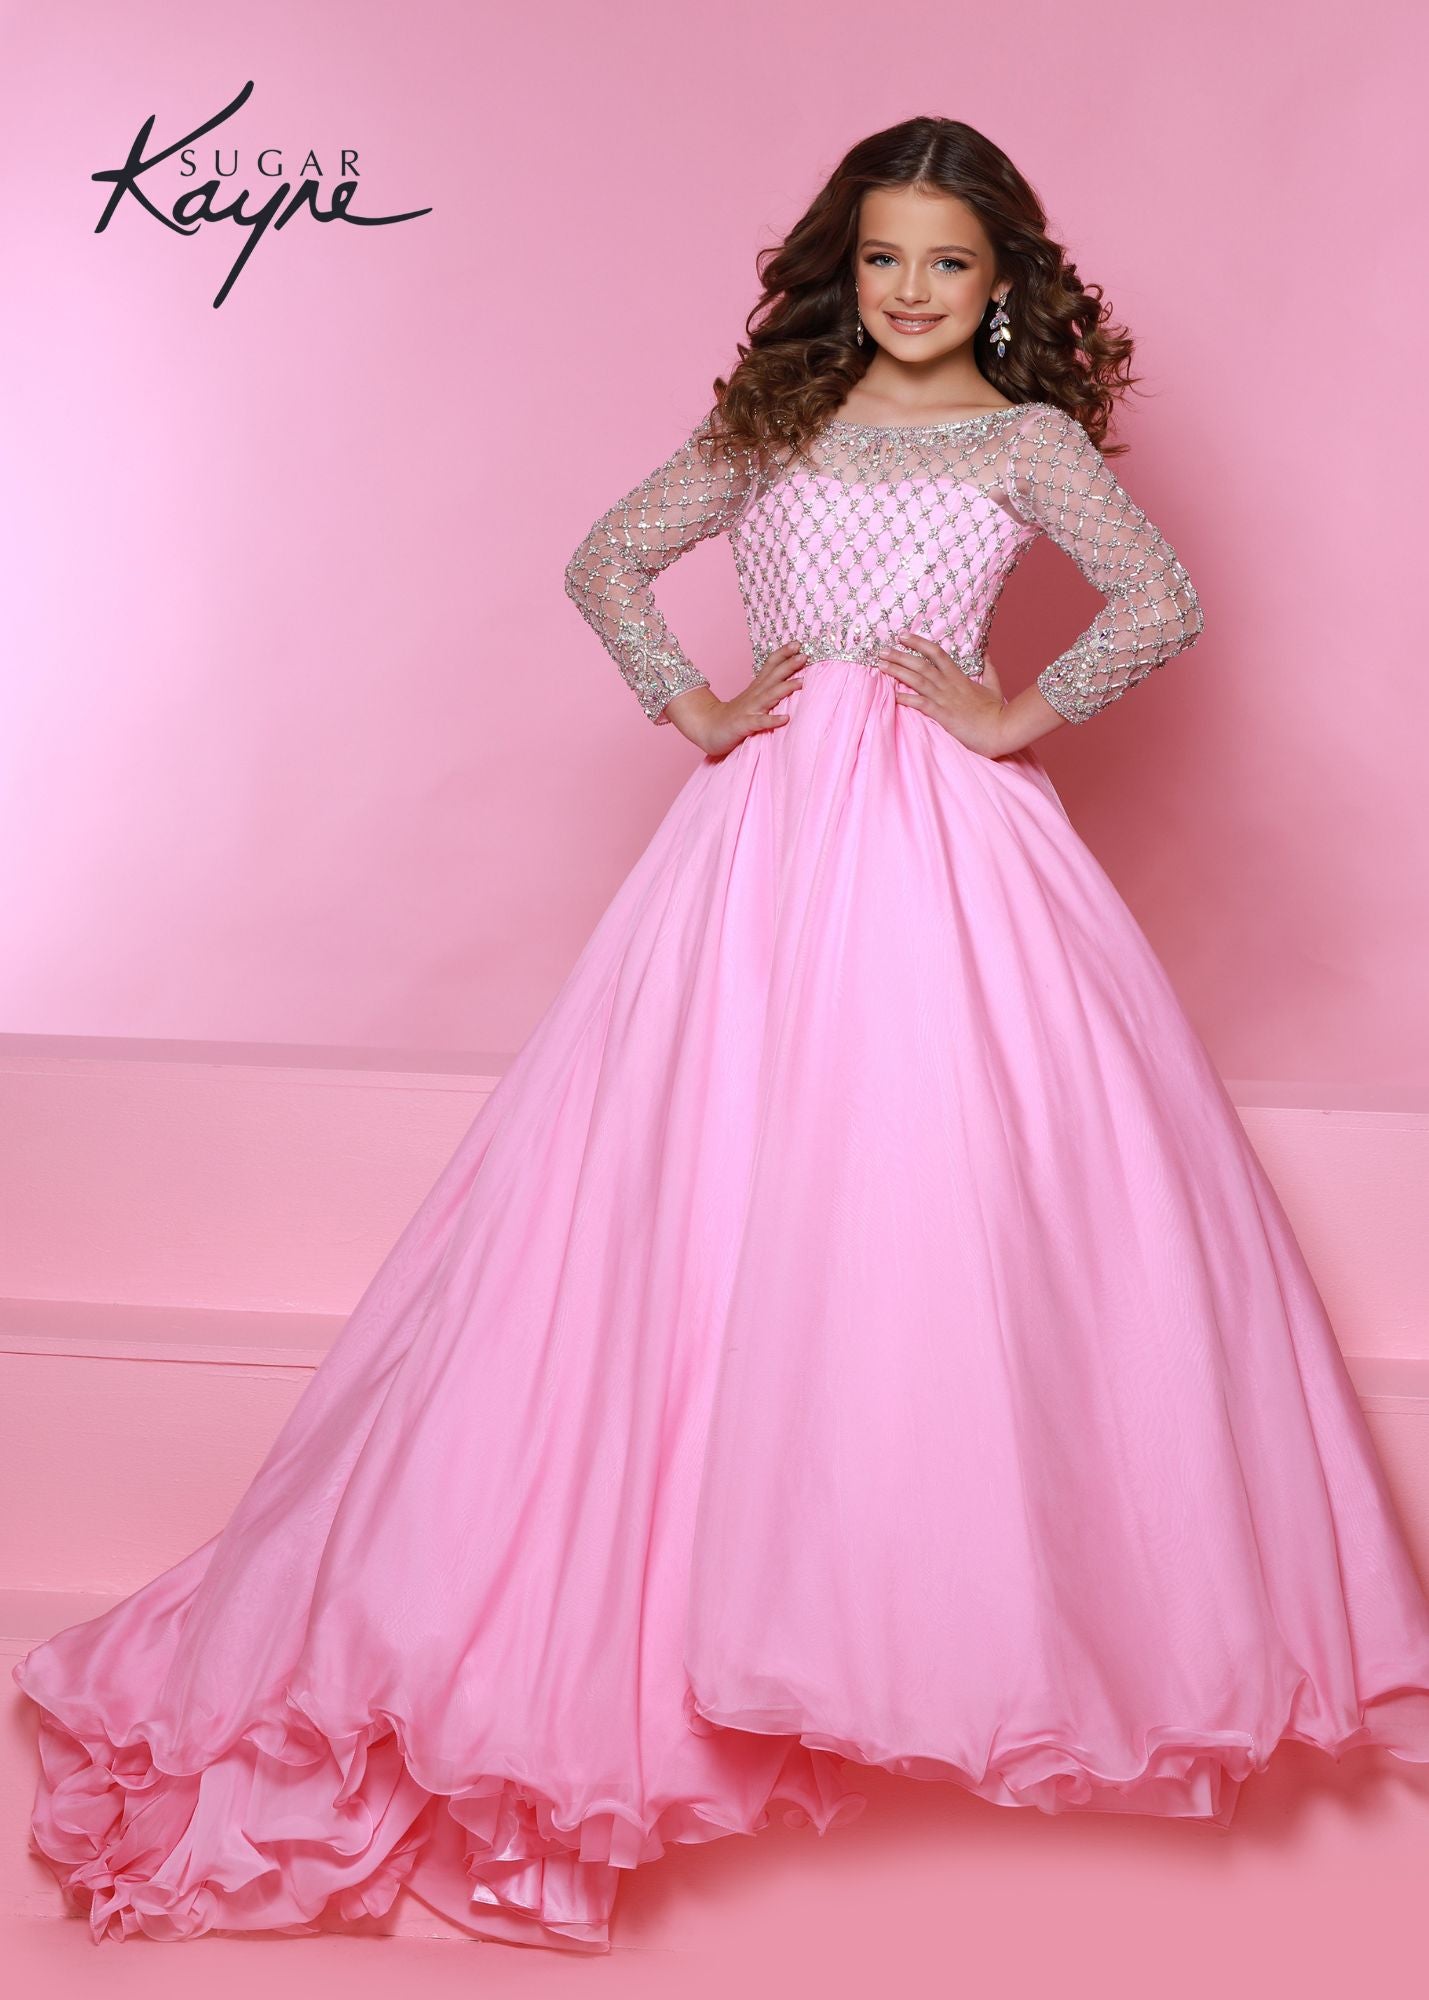 Sugar Kayne C303 Long Sleeve Sheer Crystal Chiffon Girls Pageant Dress Ball Gown Dress Product Details Be the princess you were born to be! This chiffon ballgown spotlights the luxurious hand-beaded bodice with long-sleeves to make an exquisite entrance.  Colors: Baby Blue, Petal Pink, White  Sizes: 2, 4, 6, 8, 10, 12, 14, 16  Fabric Chiffon, Mesh, Satin Lining